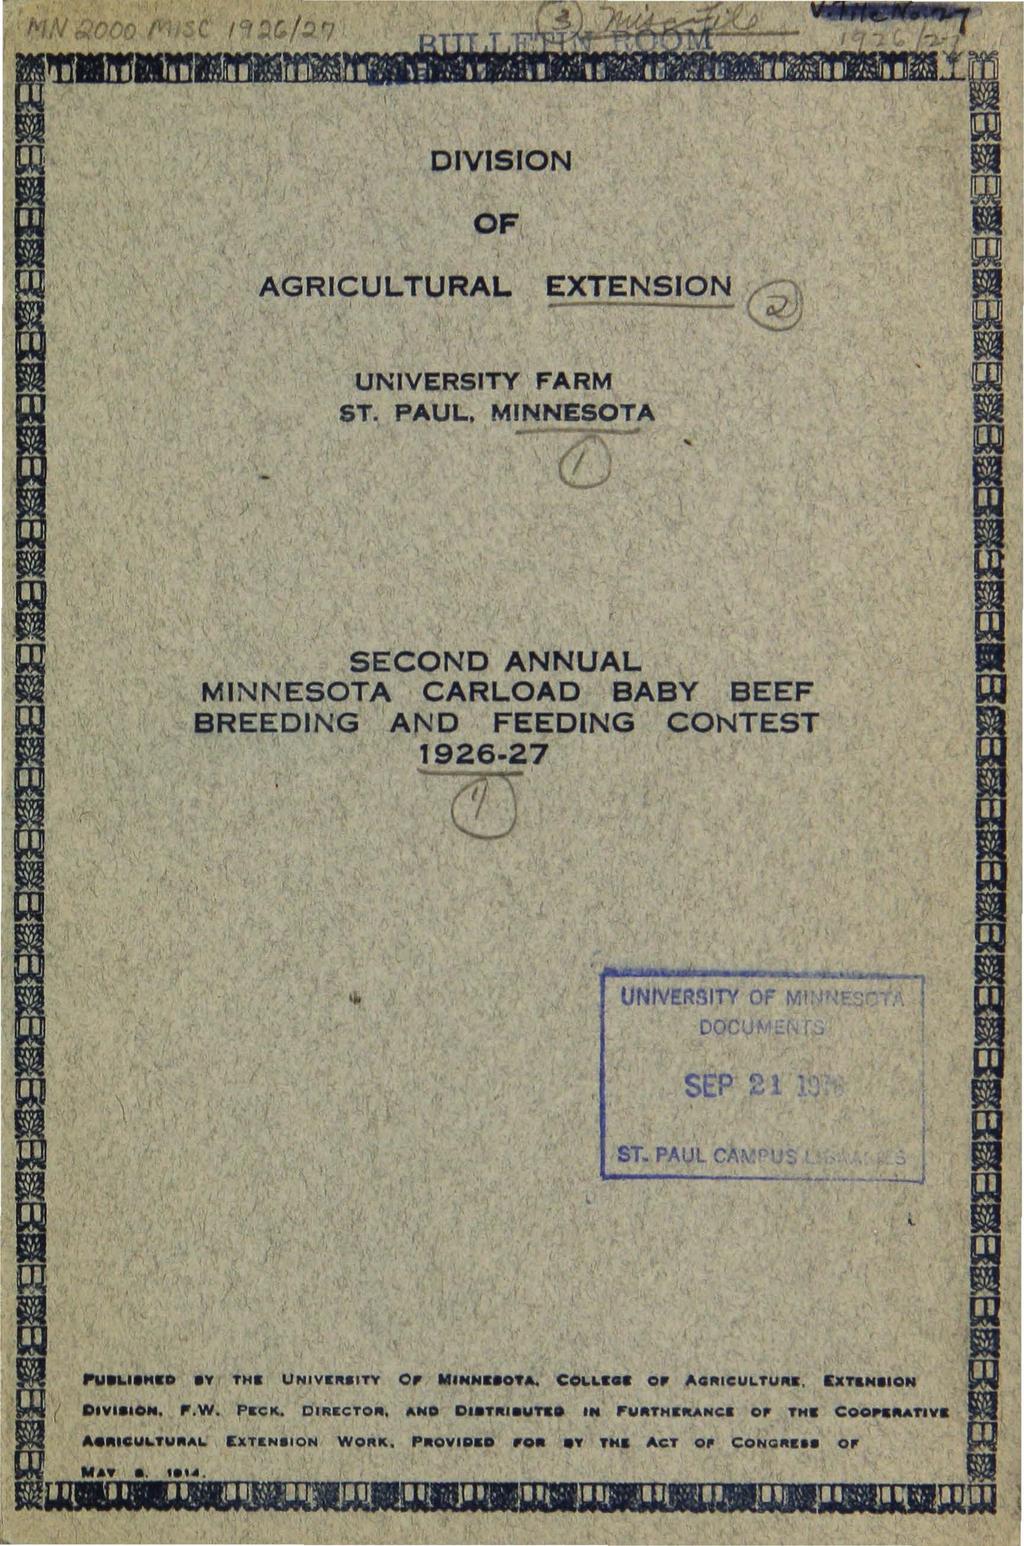 DIVISION AGRICULTURAL EXTENSION r ) UNIVERSITY FARM ST. PAUL, MINNESOTA r SECOND ANNUAL MINNESOTA CARLOAD BABY BEEF BREEDING AND FEEDING CONTEST 1926-27 l!.j \ ' SEP 2 ST.PAULCA.